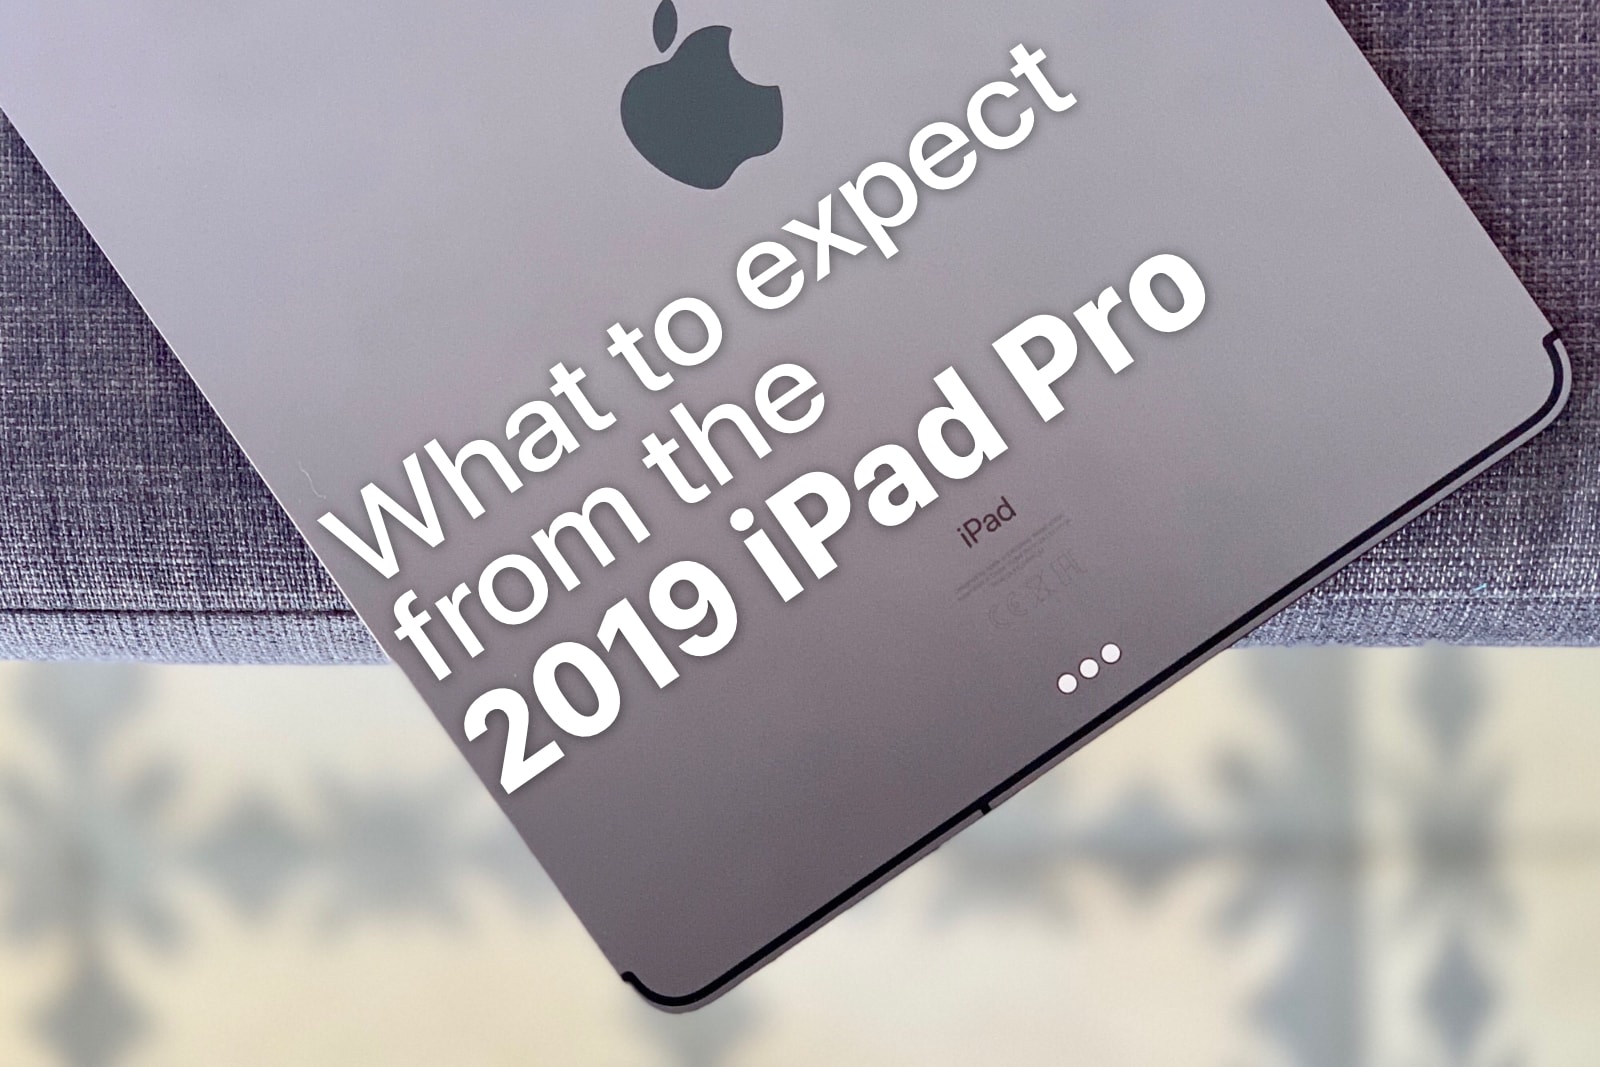 what-to-expect-2019-ipad-pro